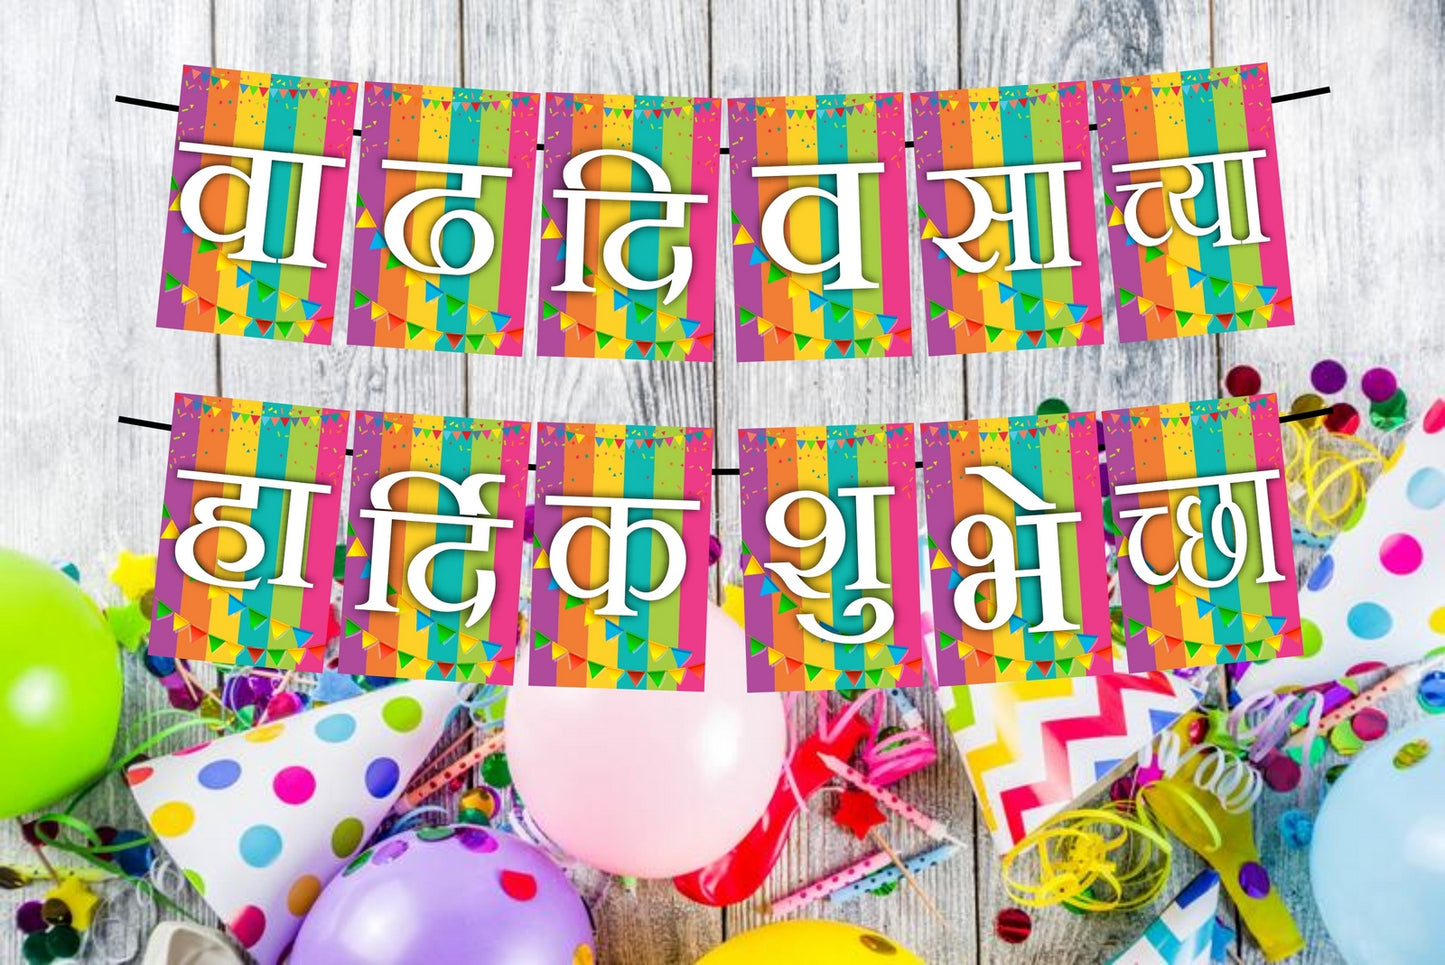 Marathi Language Happy Birthday Decoration Hanging and Banner for Photo Shoot Backdrop and Theme Party